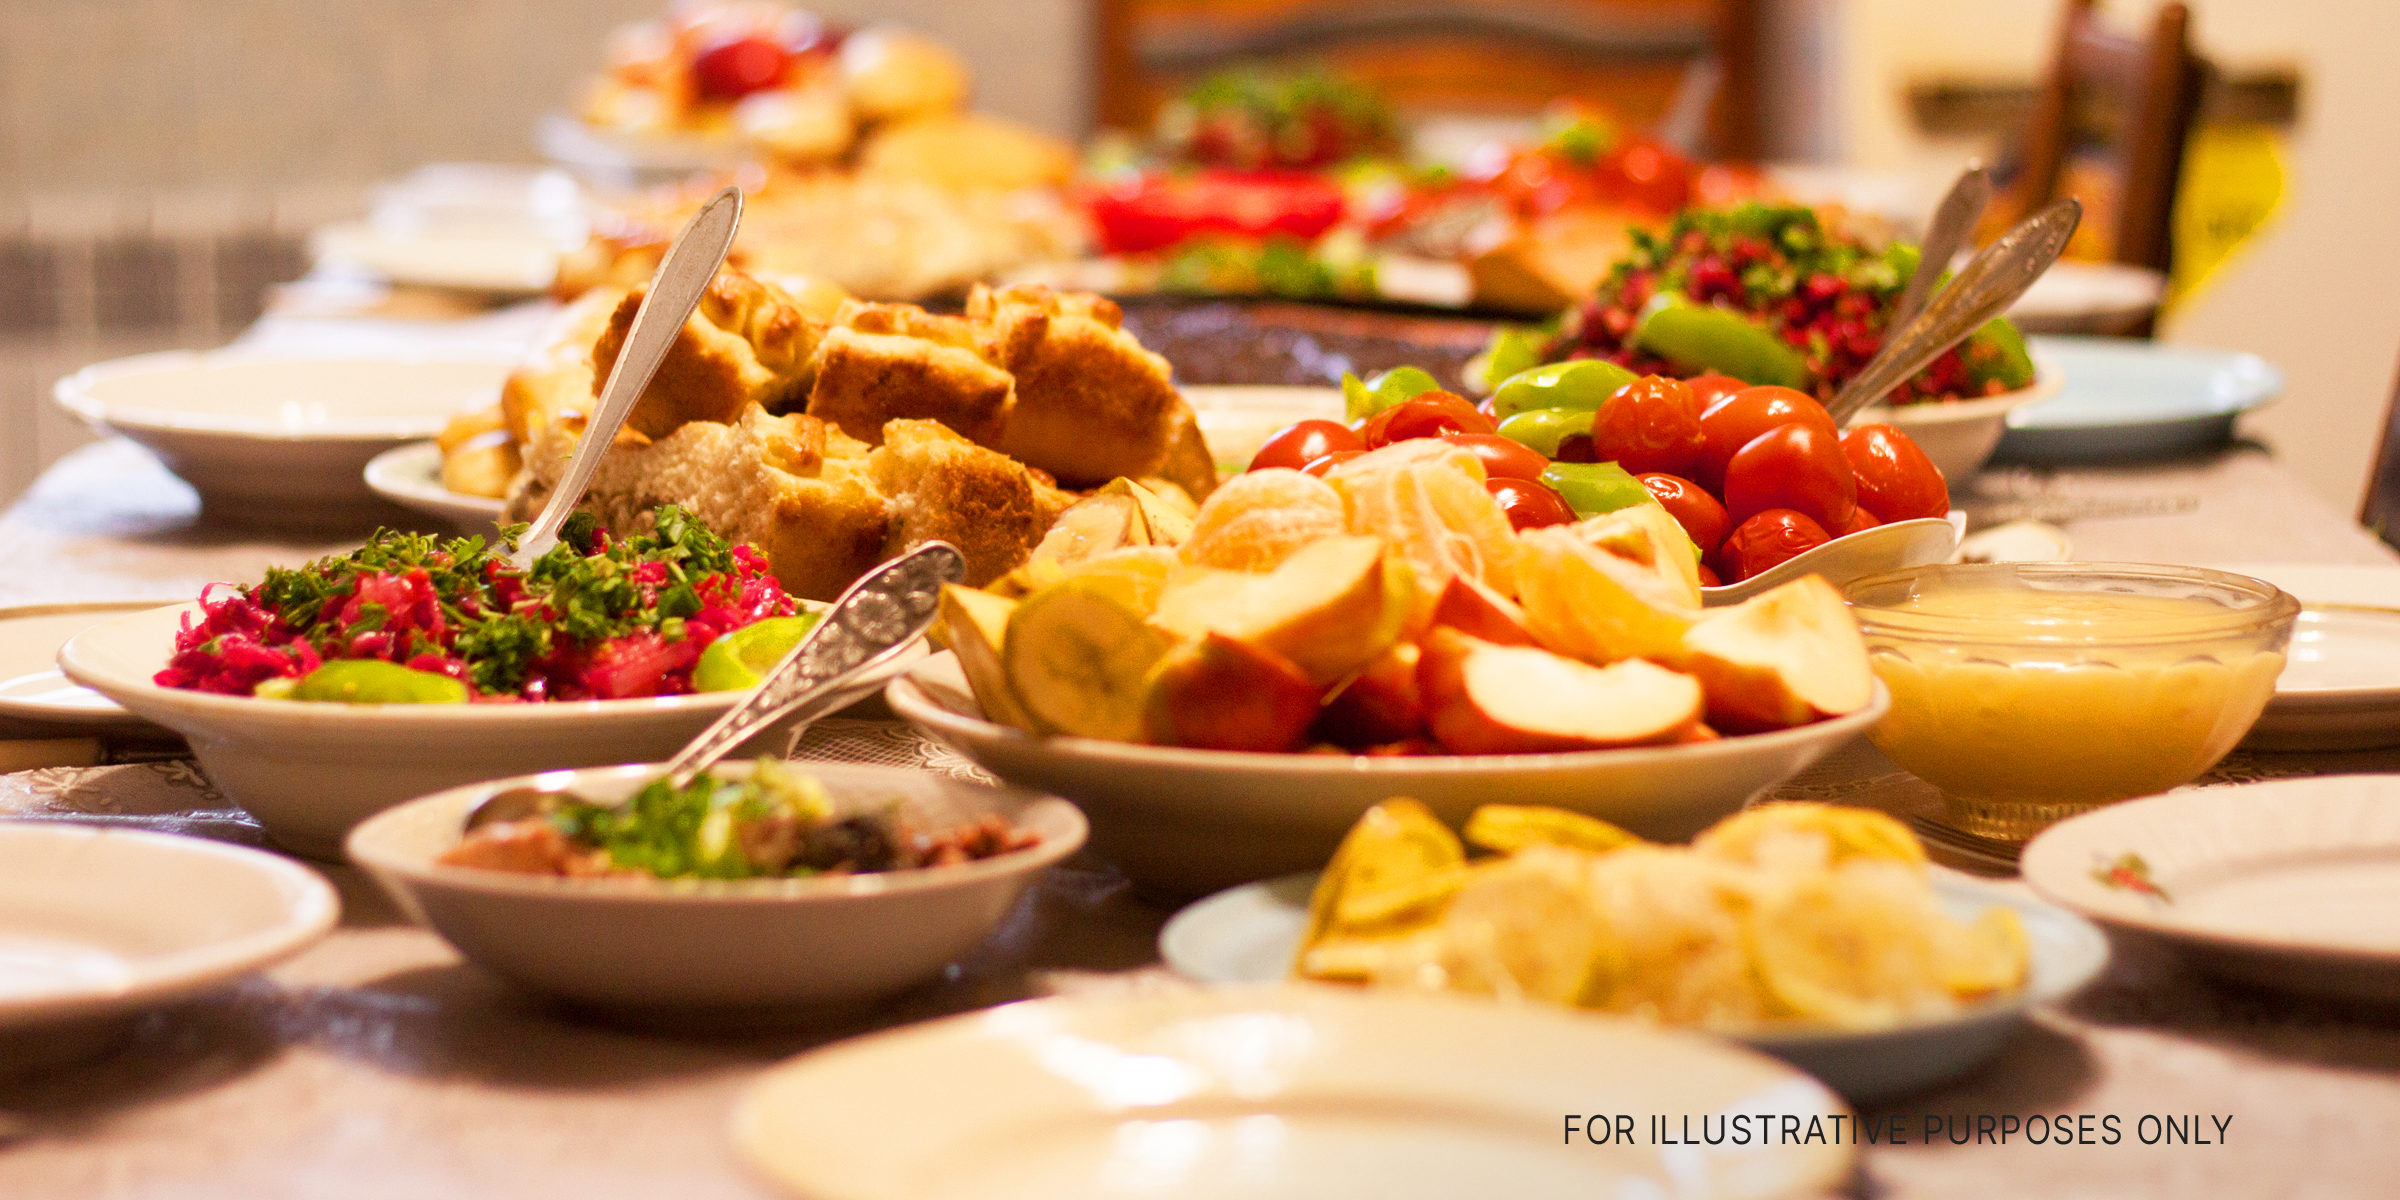 Table full of food | Source: Shutterstock